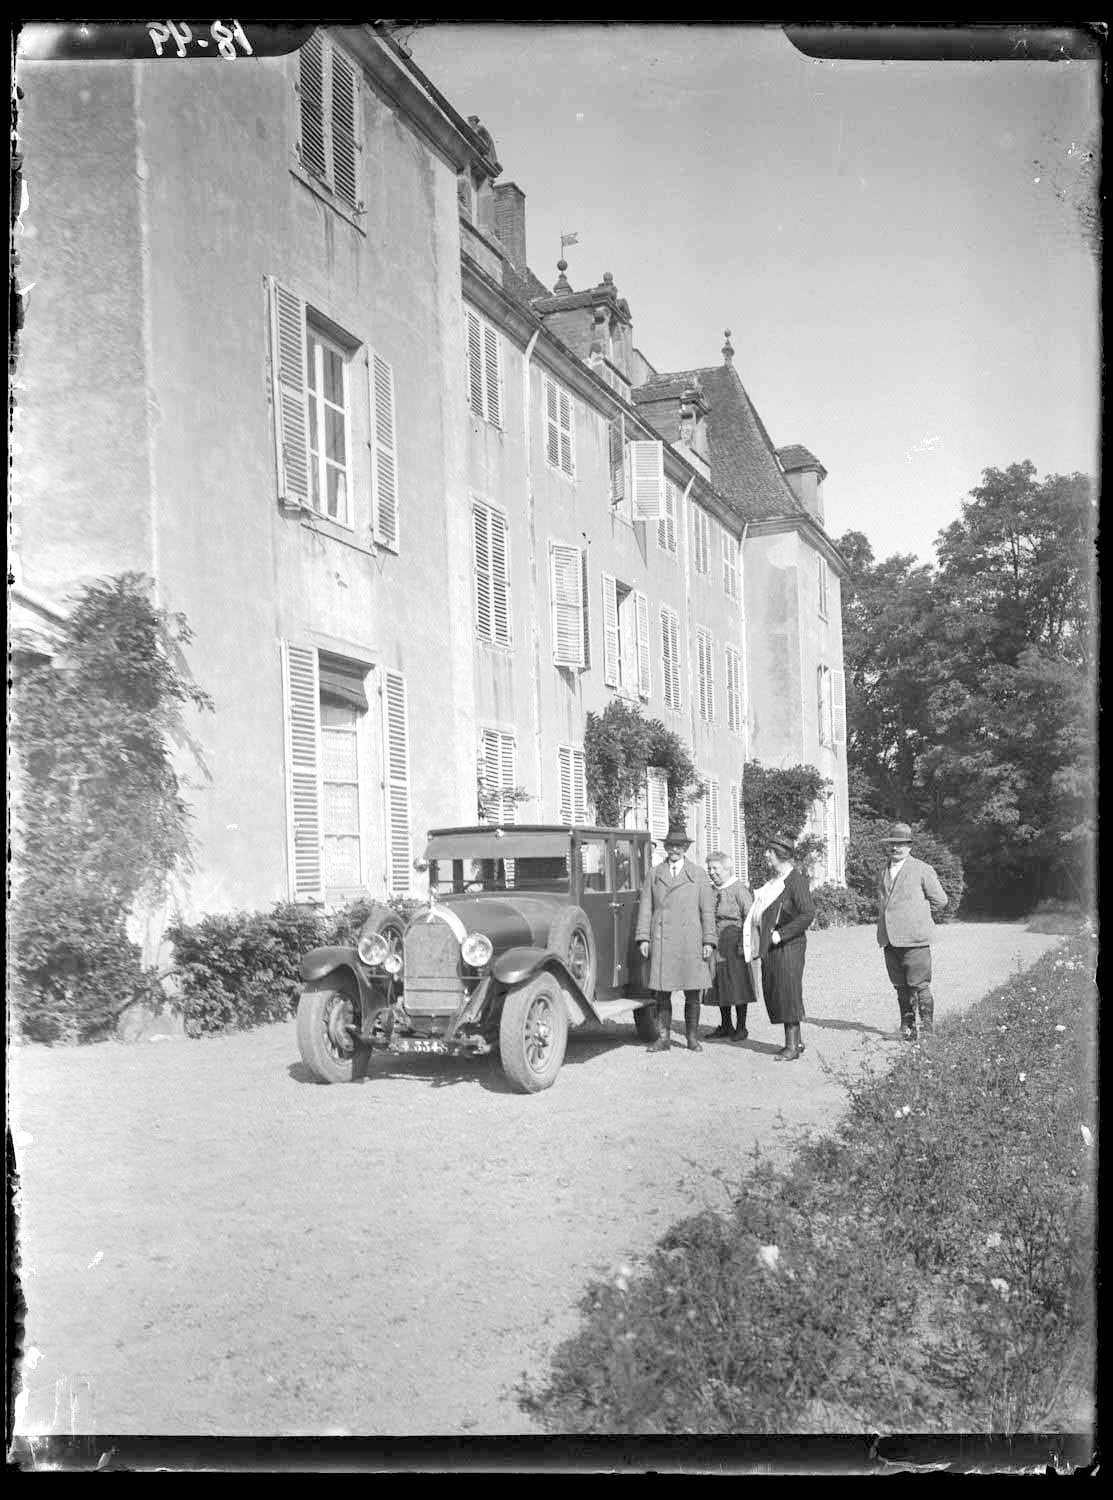 Paul Servant - Side view, group portrait of people in European dress by car in front of a residential building